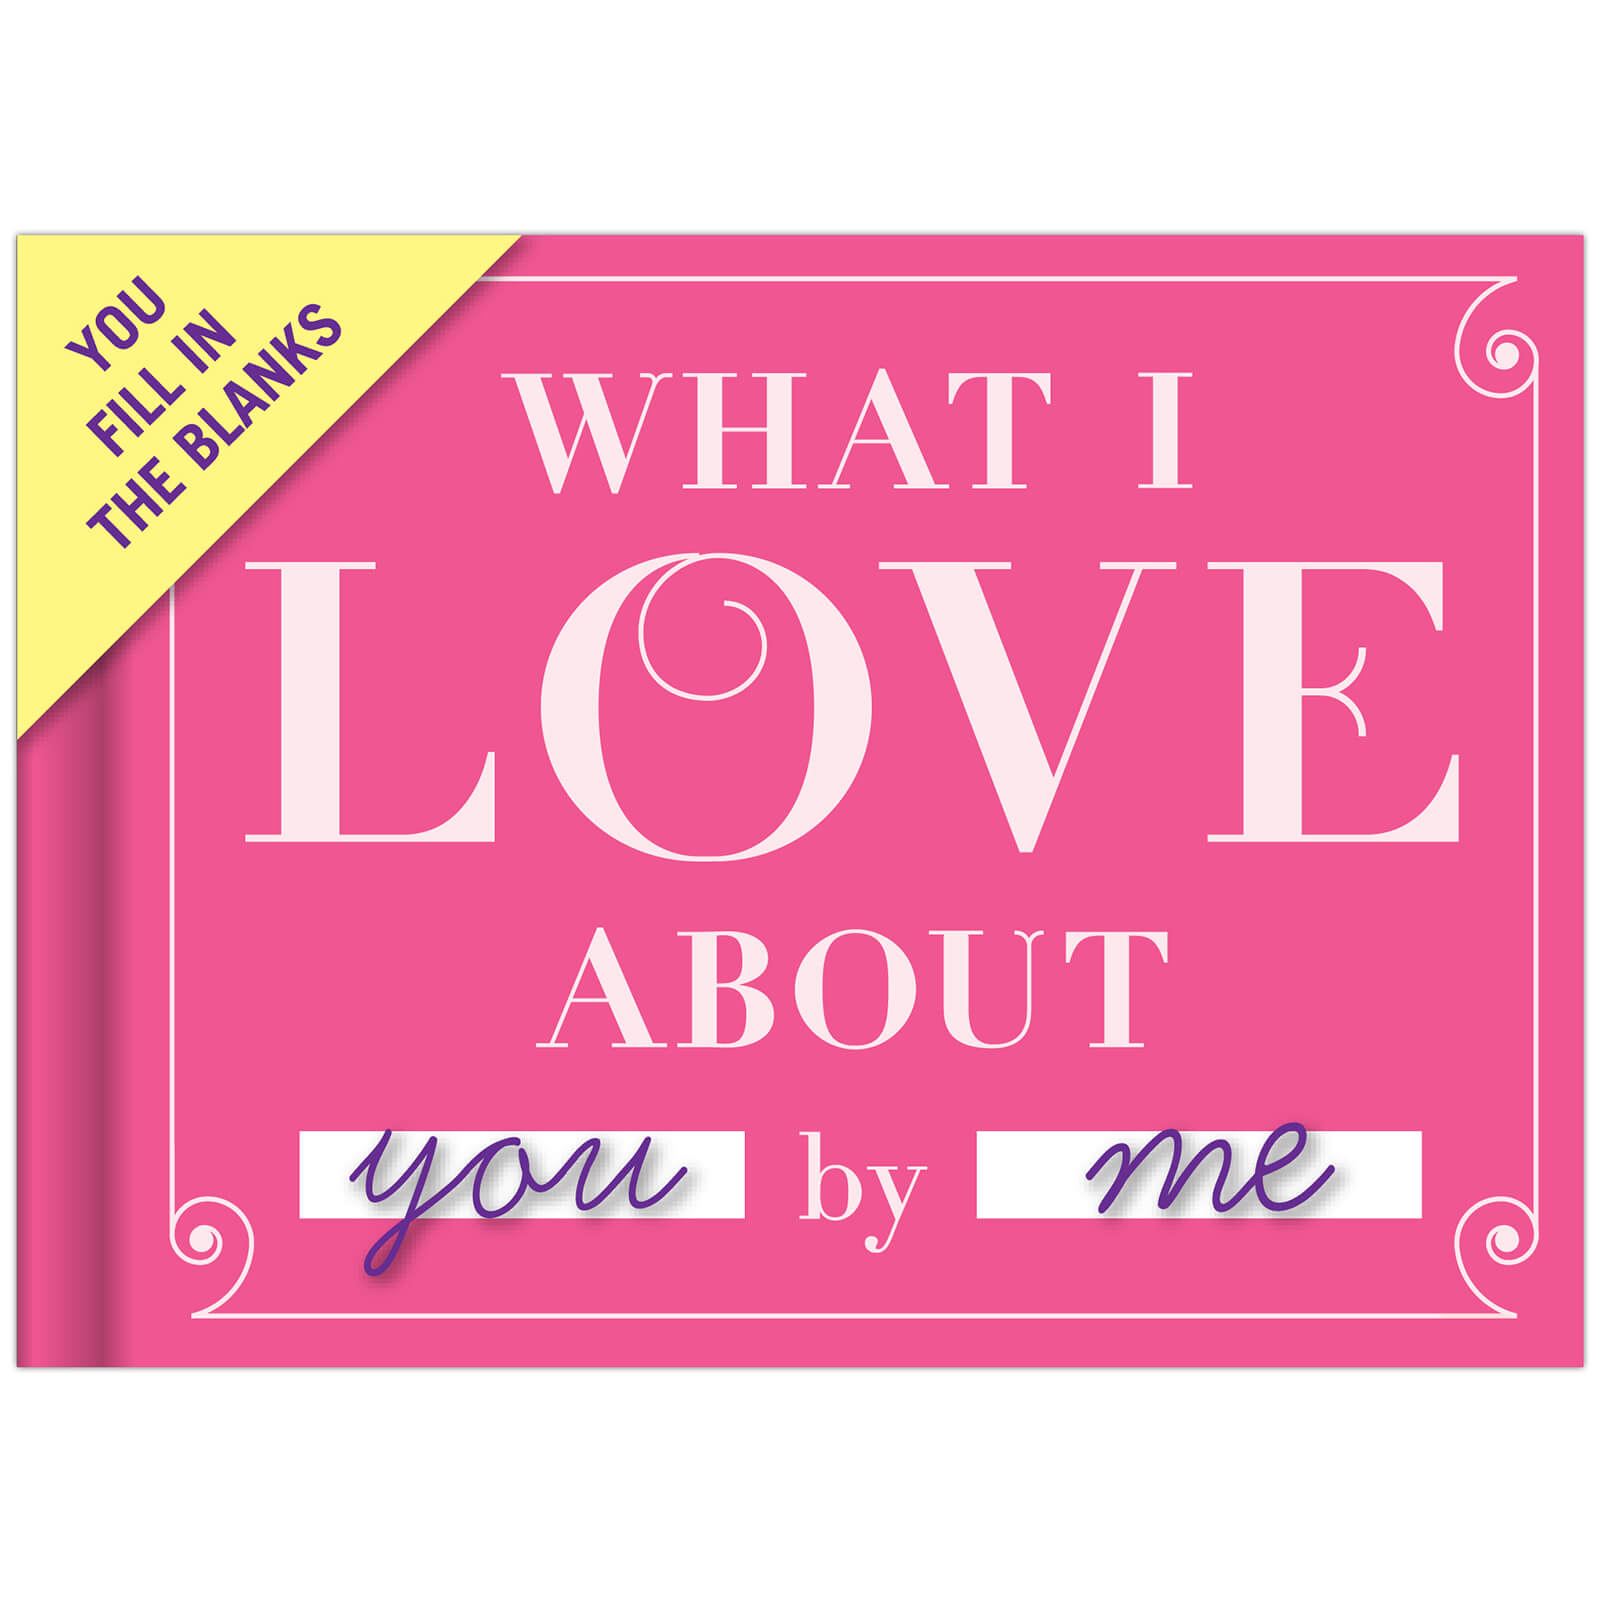 Knock Knock Love Journal: Love About You